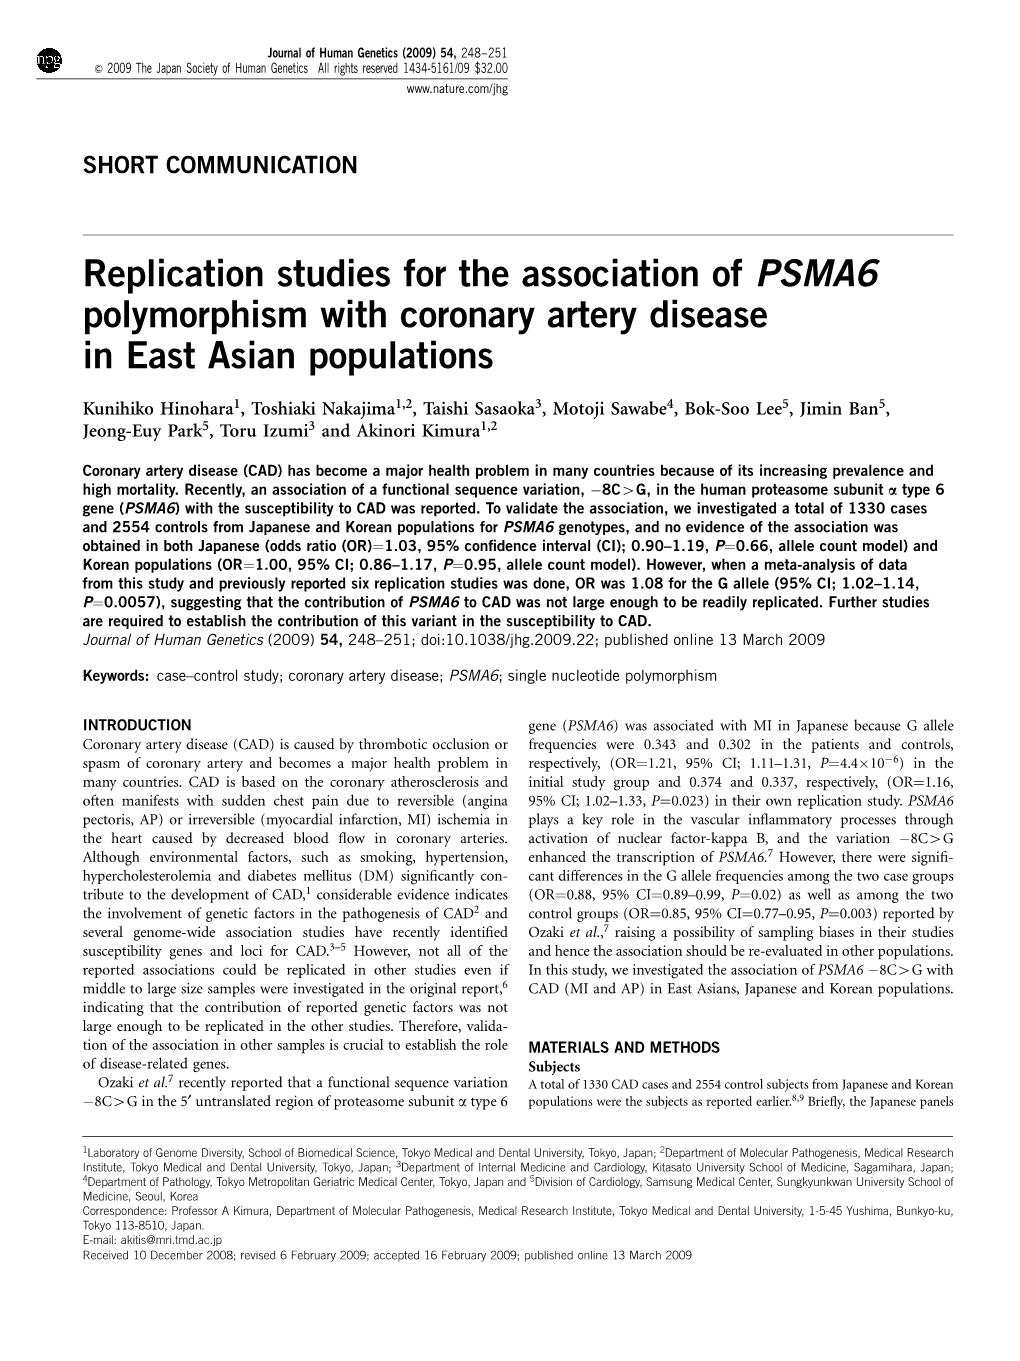 Replication Studies for the Association of PSMA6 Polymorphism with Coronary Artery Disease in East Asian Populations